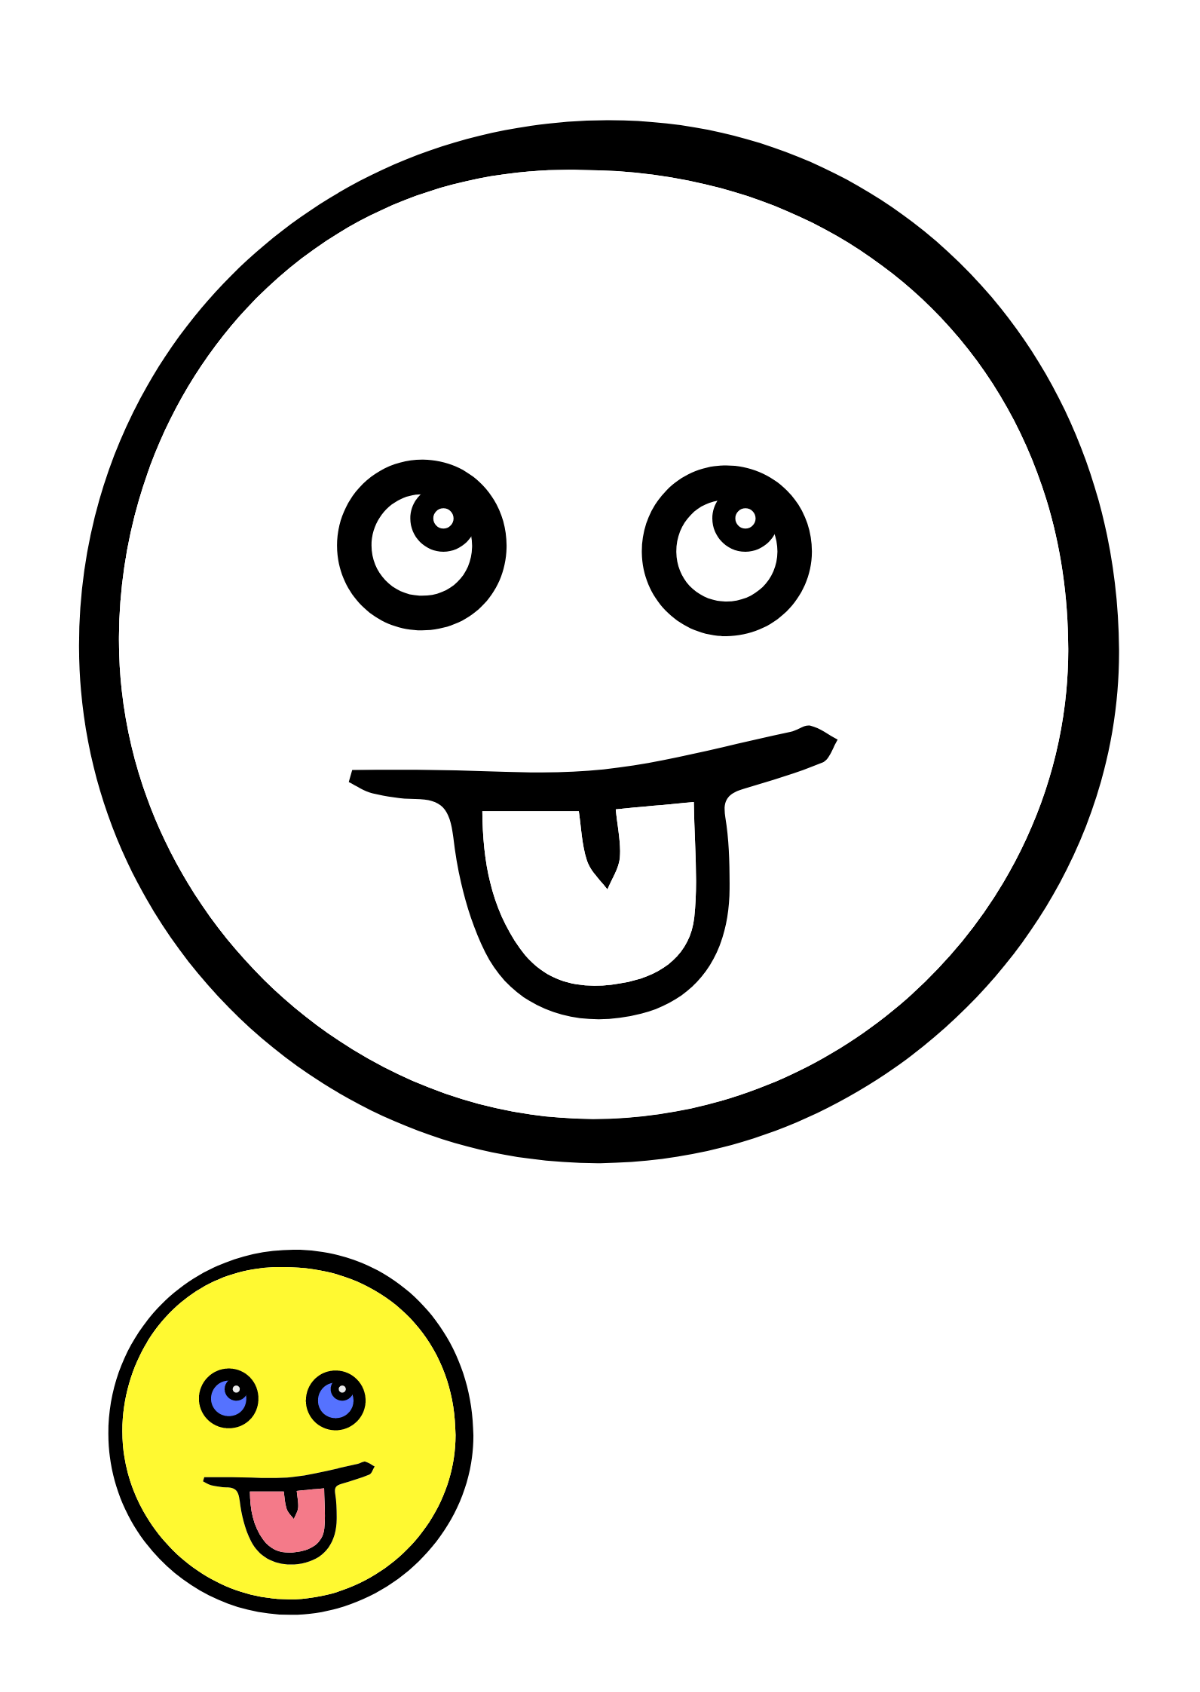 Doodle Smiley coloring page